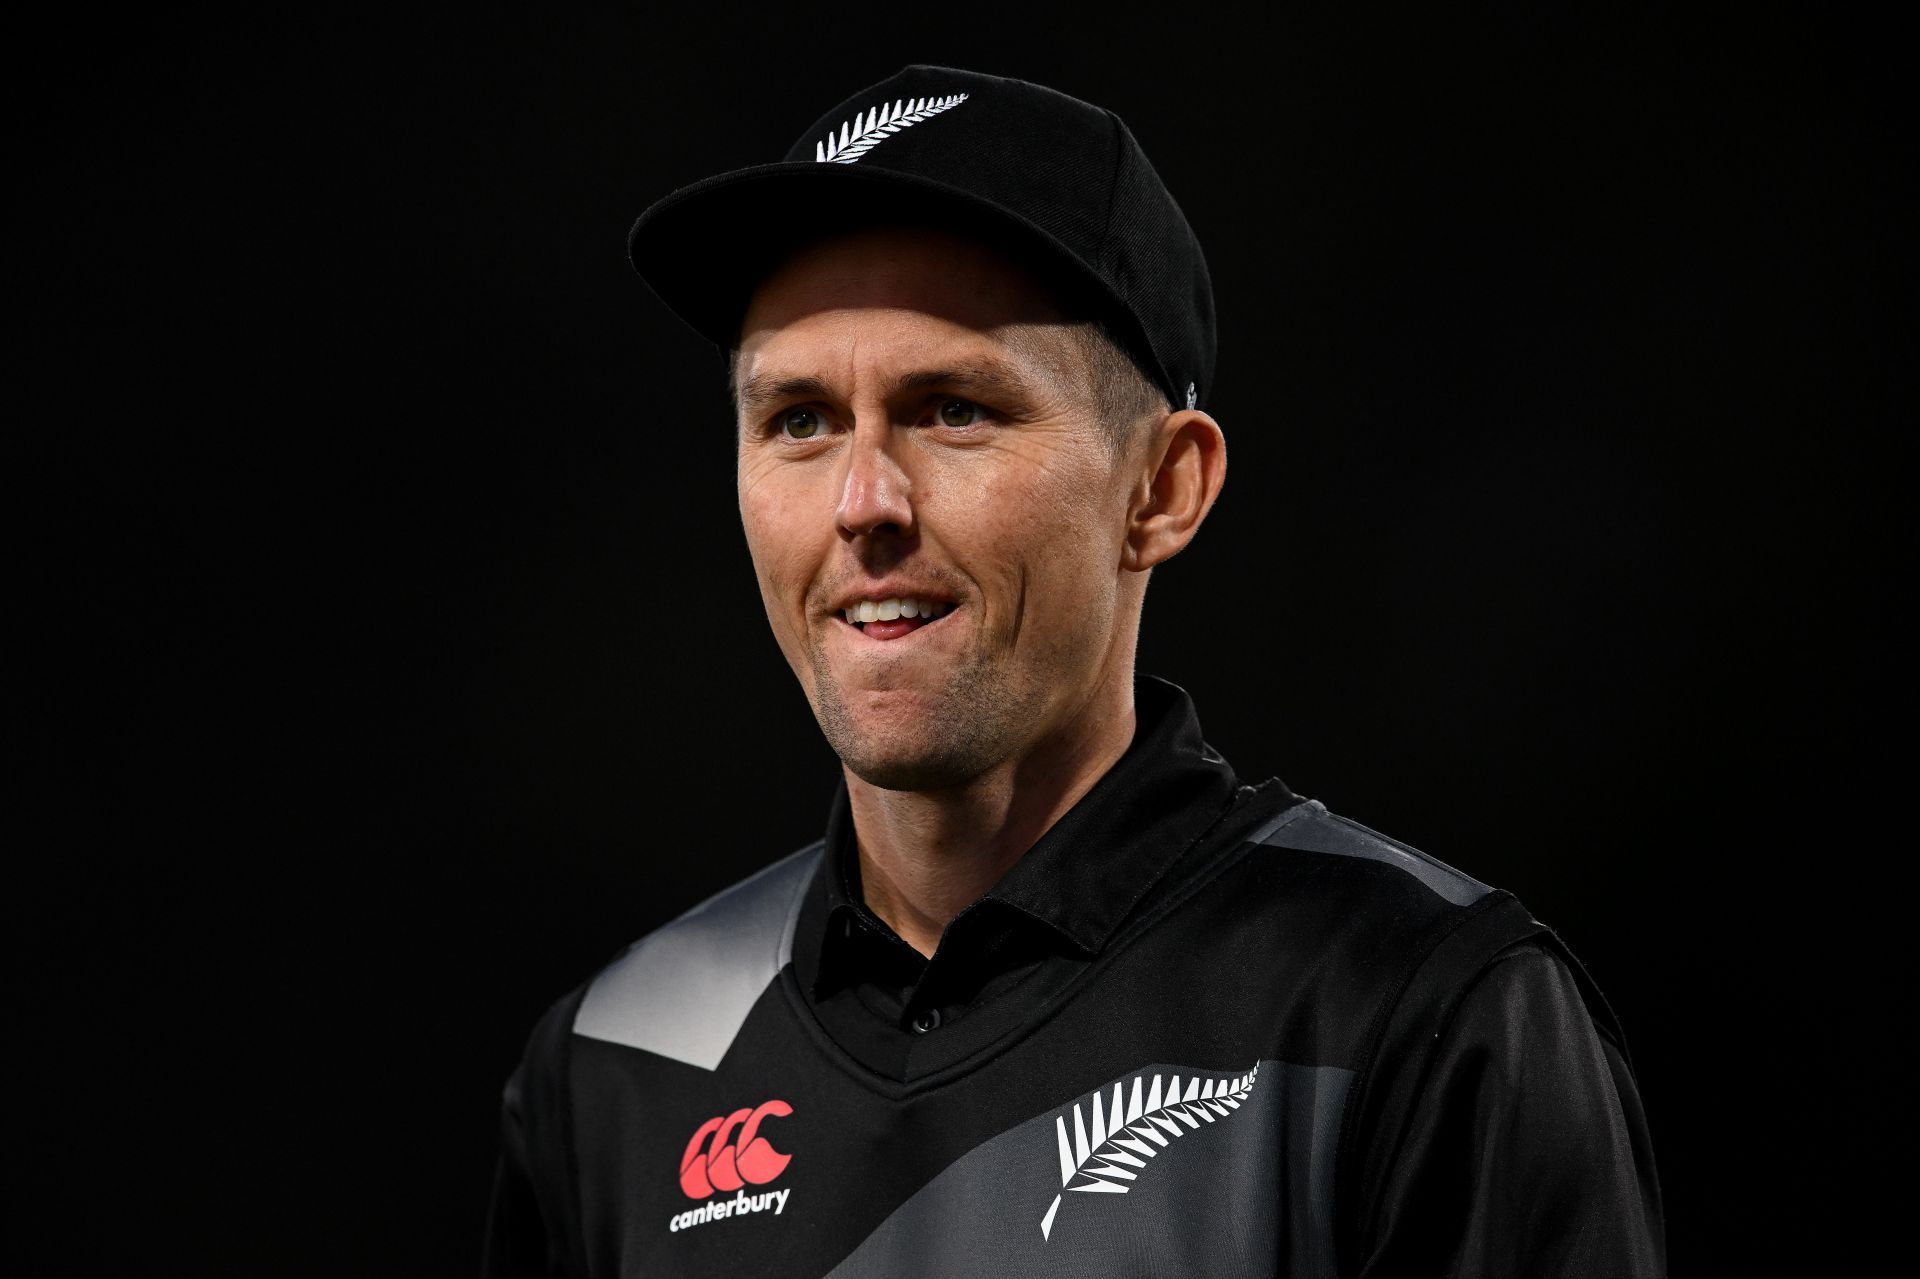 Boult is an experienced bowler